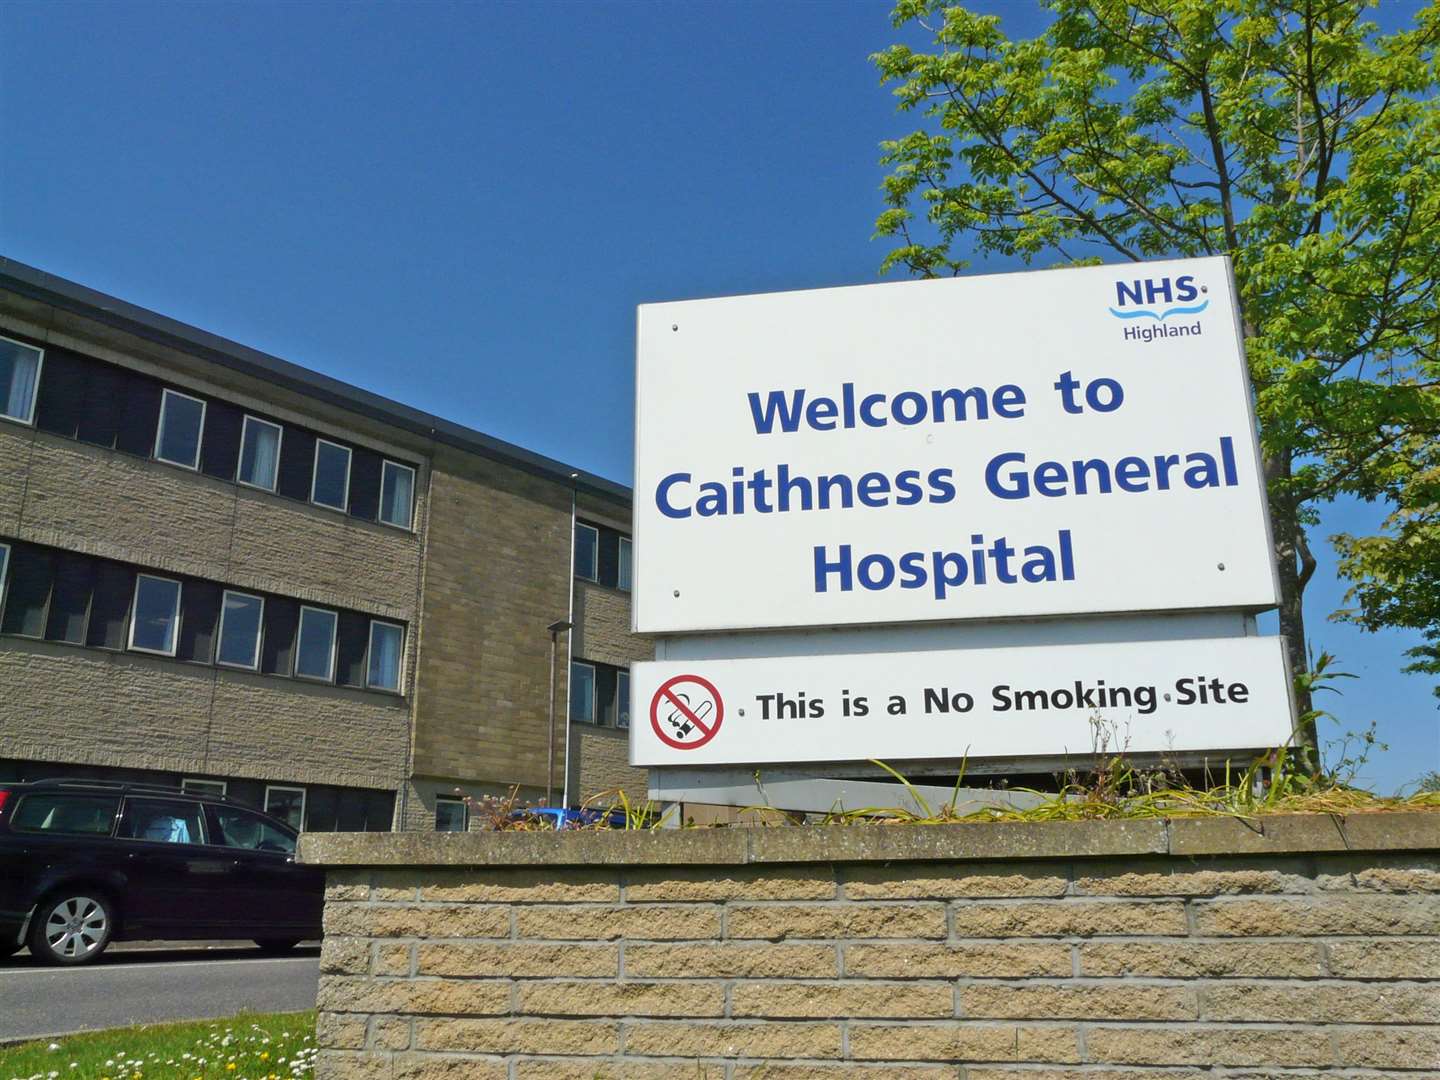 People smoking within the new 15-metre perimeter outside NHS hospital buildings will risk facing a fixed penalty of £50 or a fine of up to £1000 if they are taken to court.